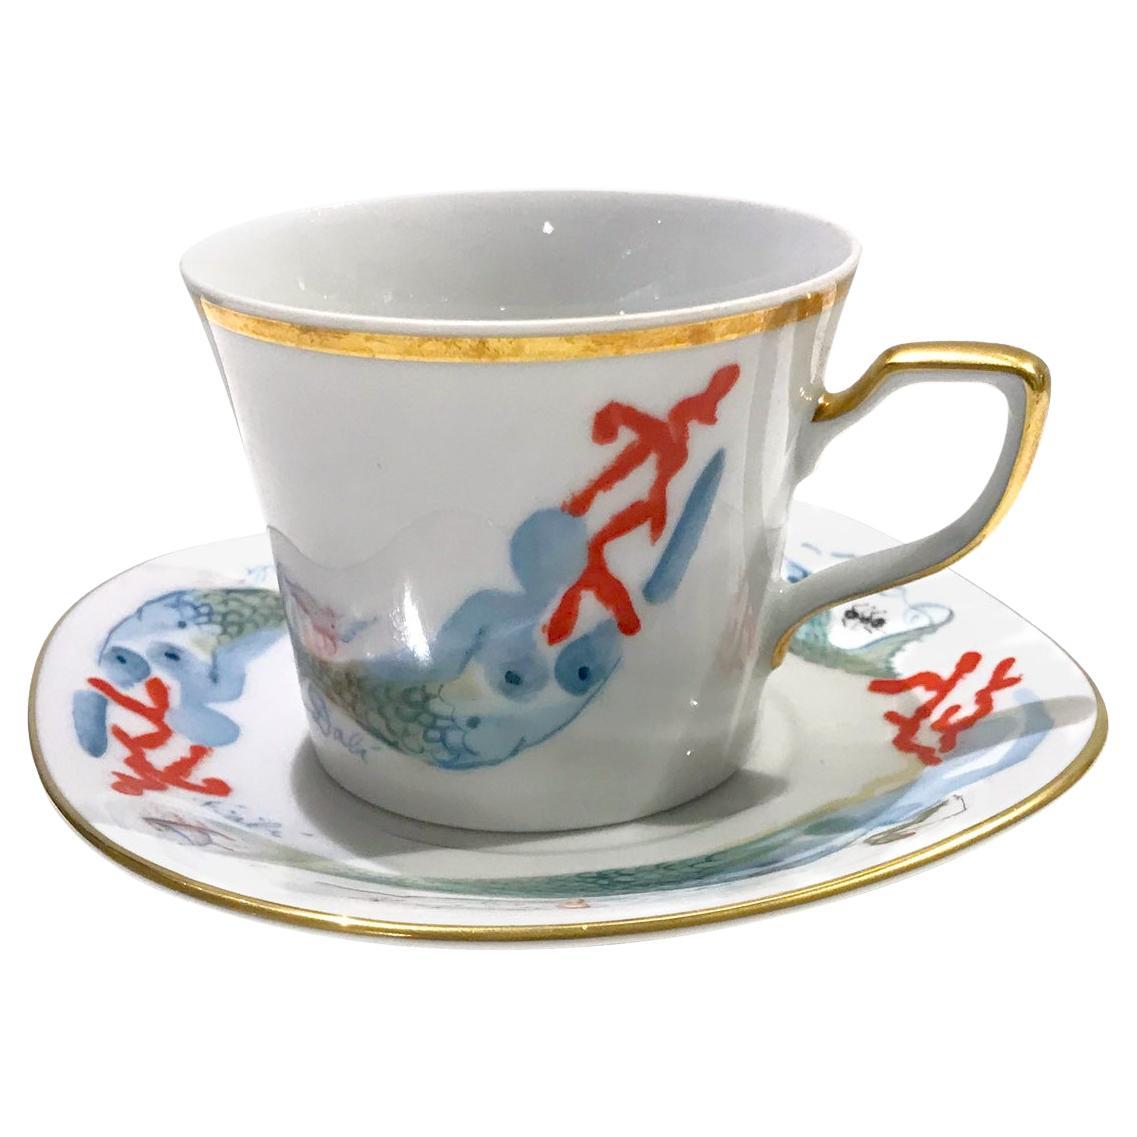 Porcelain Coffee Cup and Saucer "Sirenas" Designed by Dalí, N°520/1000 For Sale